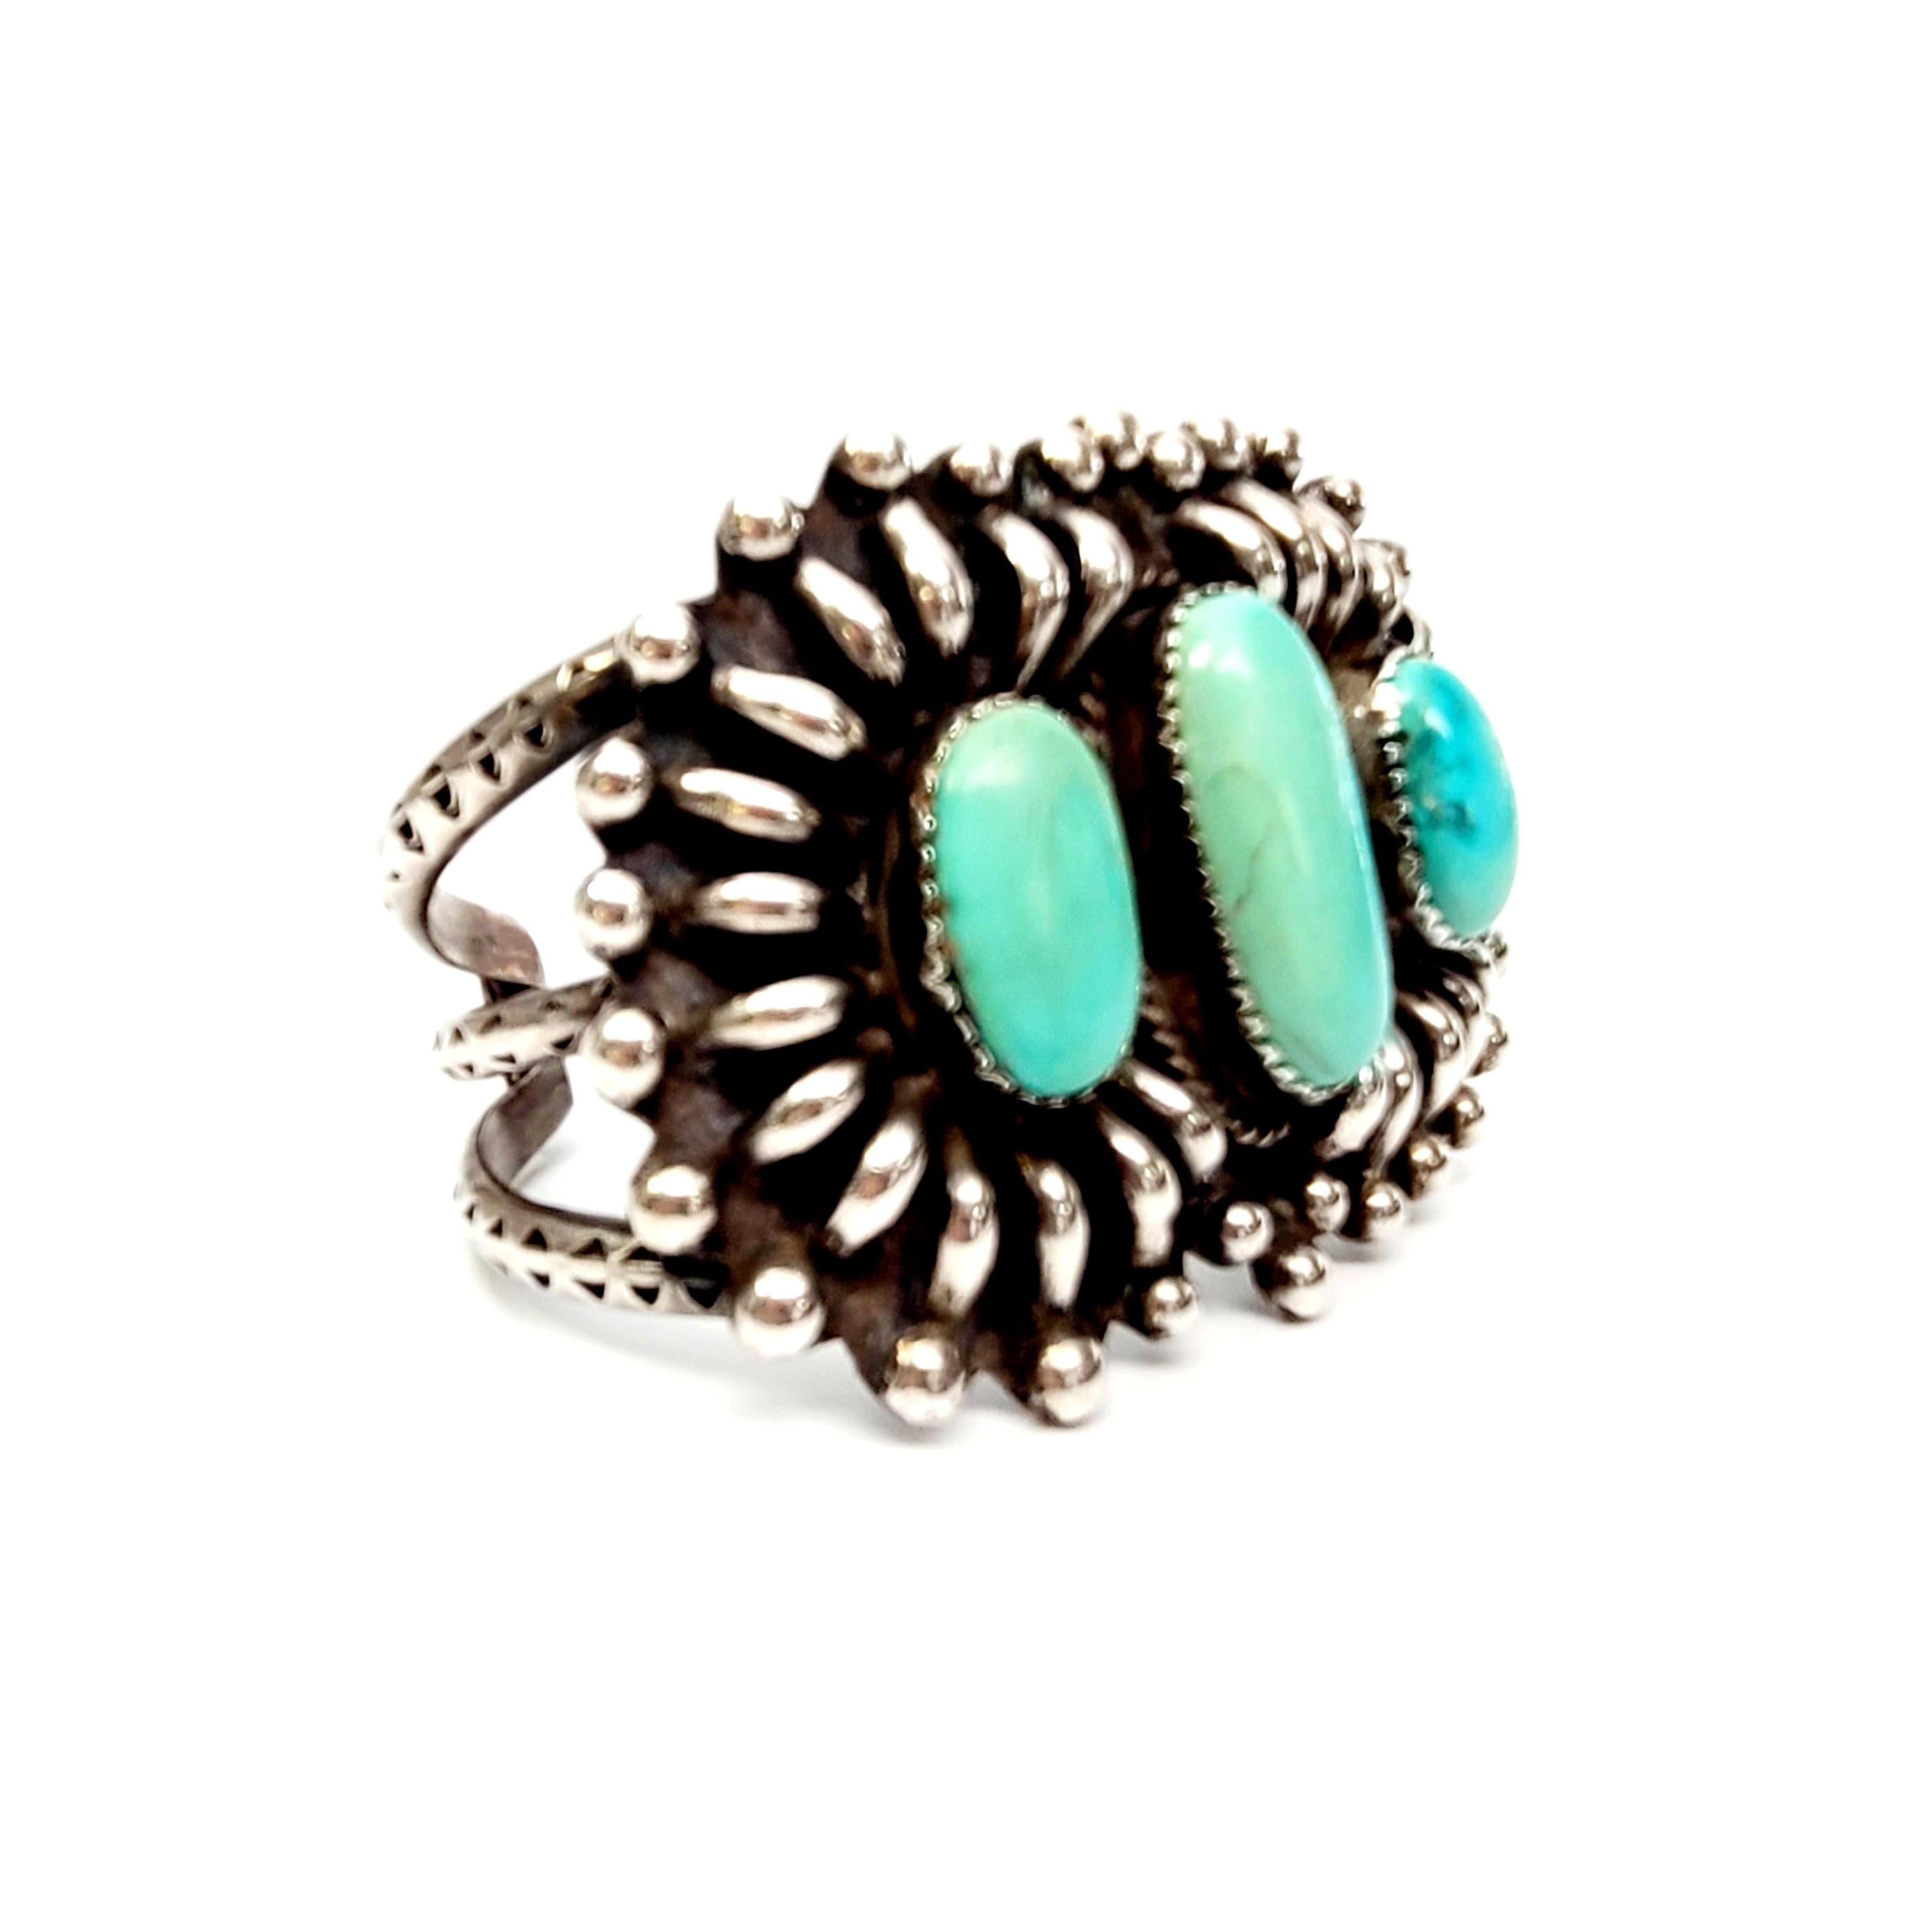 Native American Daisy M Tsosie Large Sterling Silver Turquoise Cuff Bracelet 1